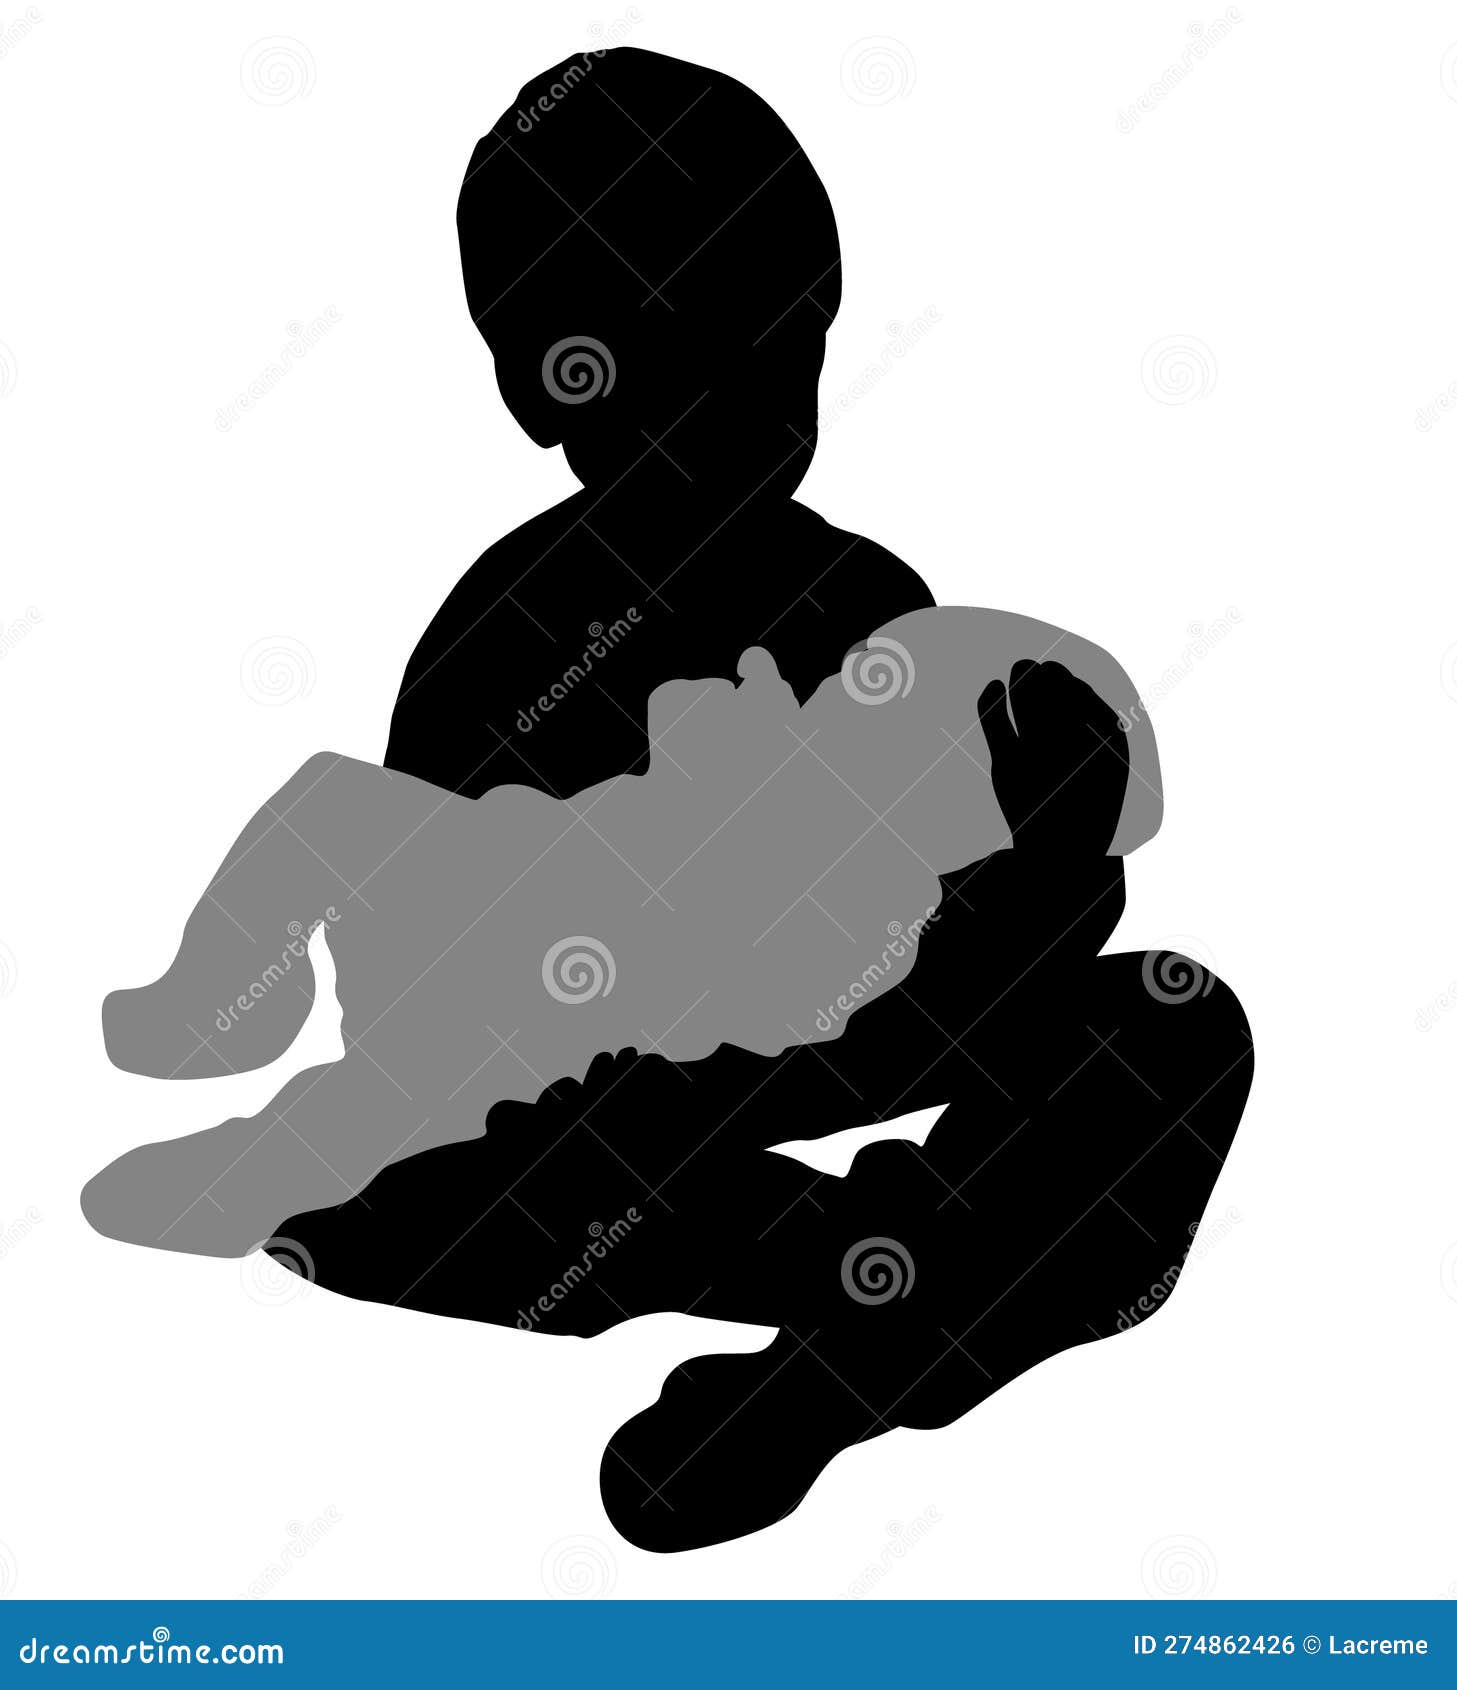 Two Brothers Silhouettes Concept Vector Illustration Stock Illustration ...